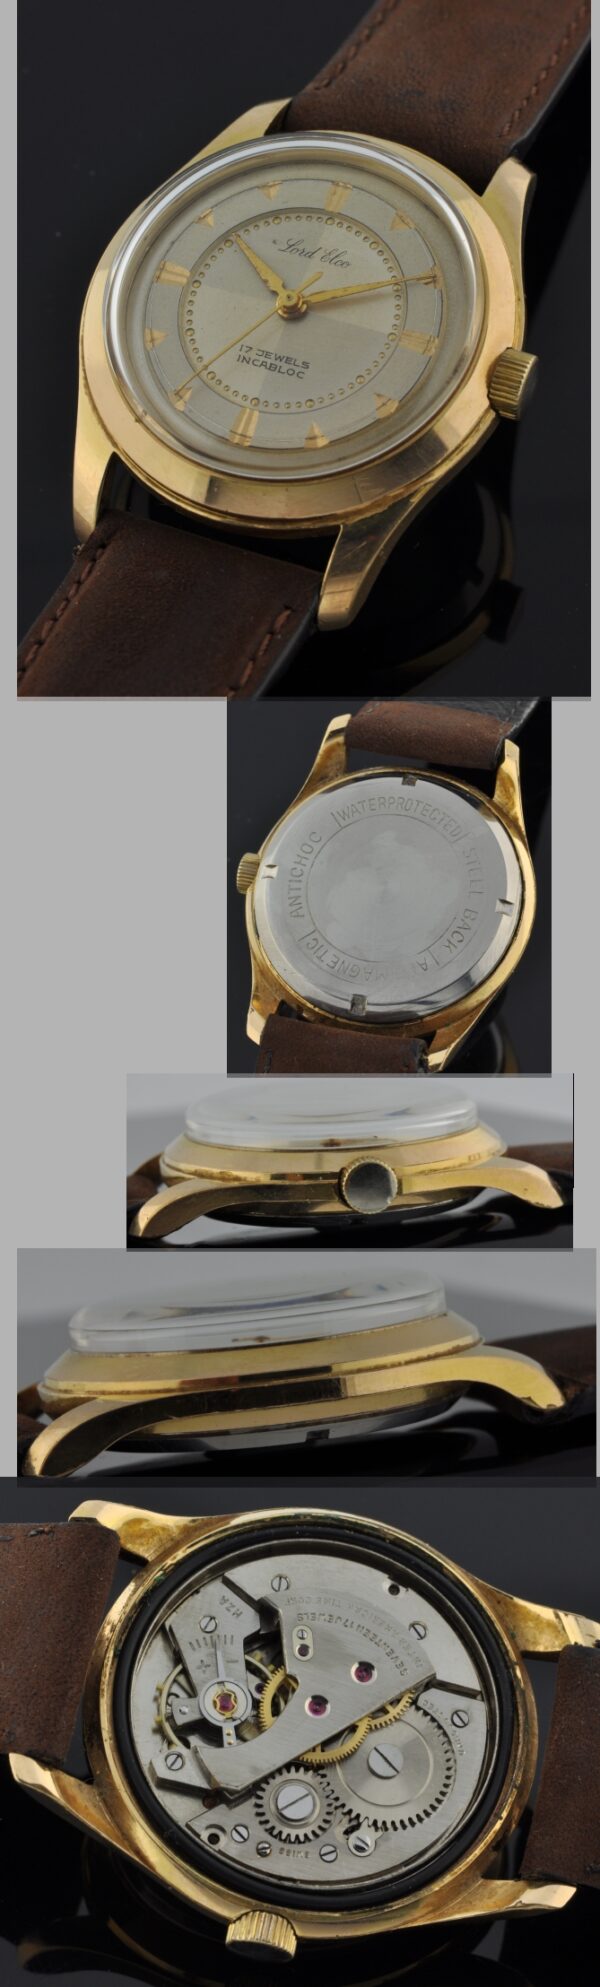 1950s Lord Elco gold-filled watch with original sunken, two-tone, quadrant-style dial, screw-back case without any dings or scratches.